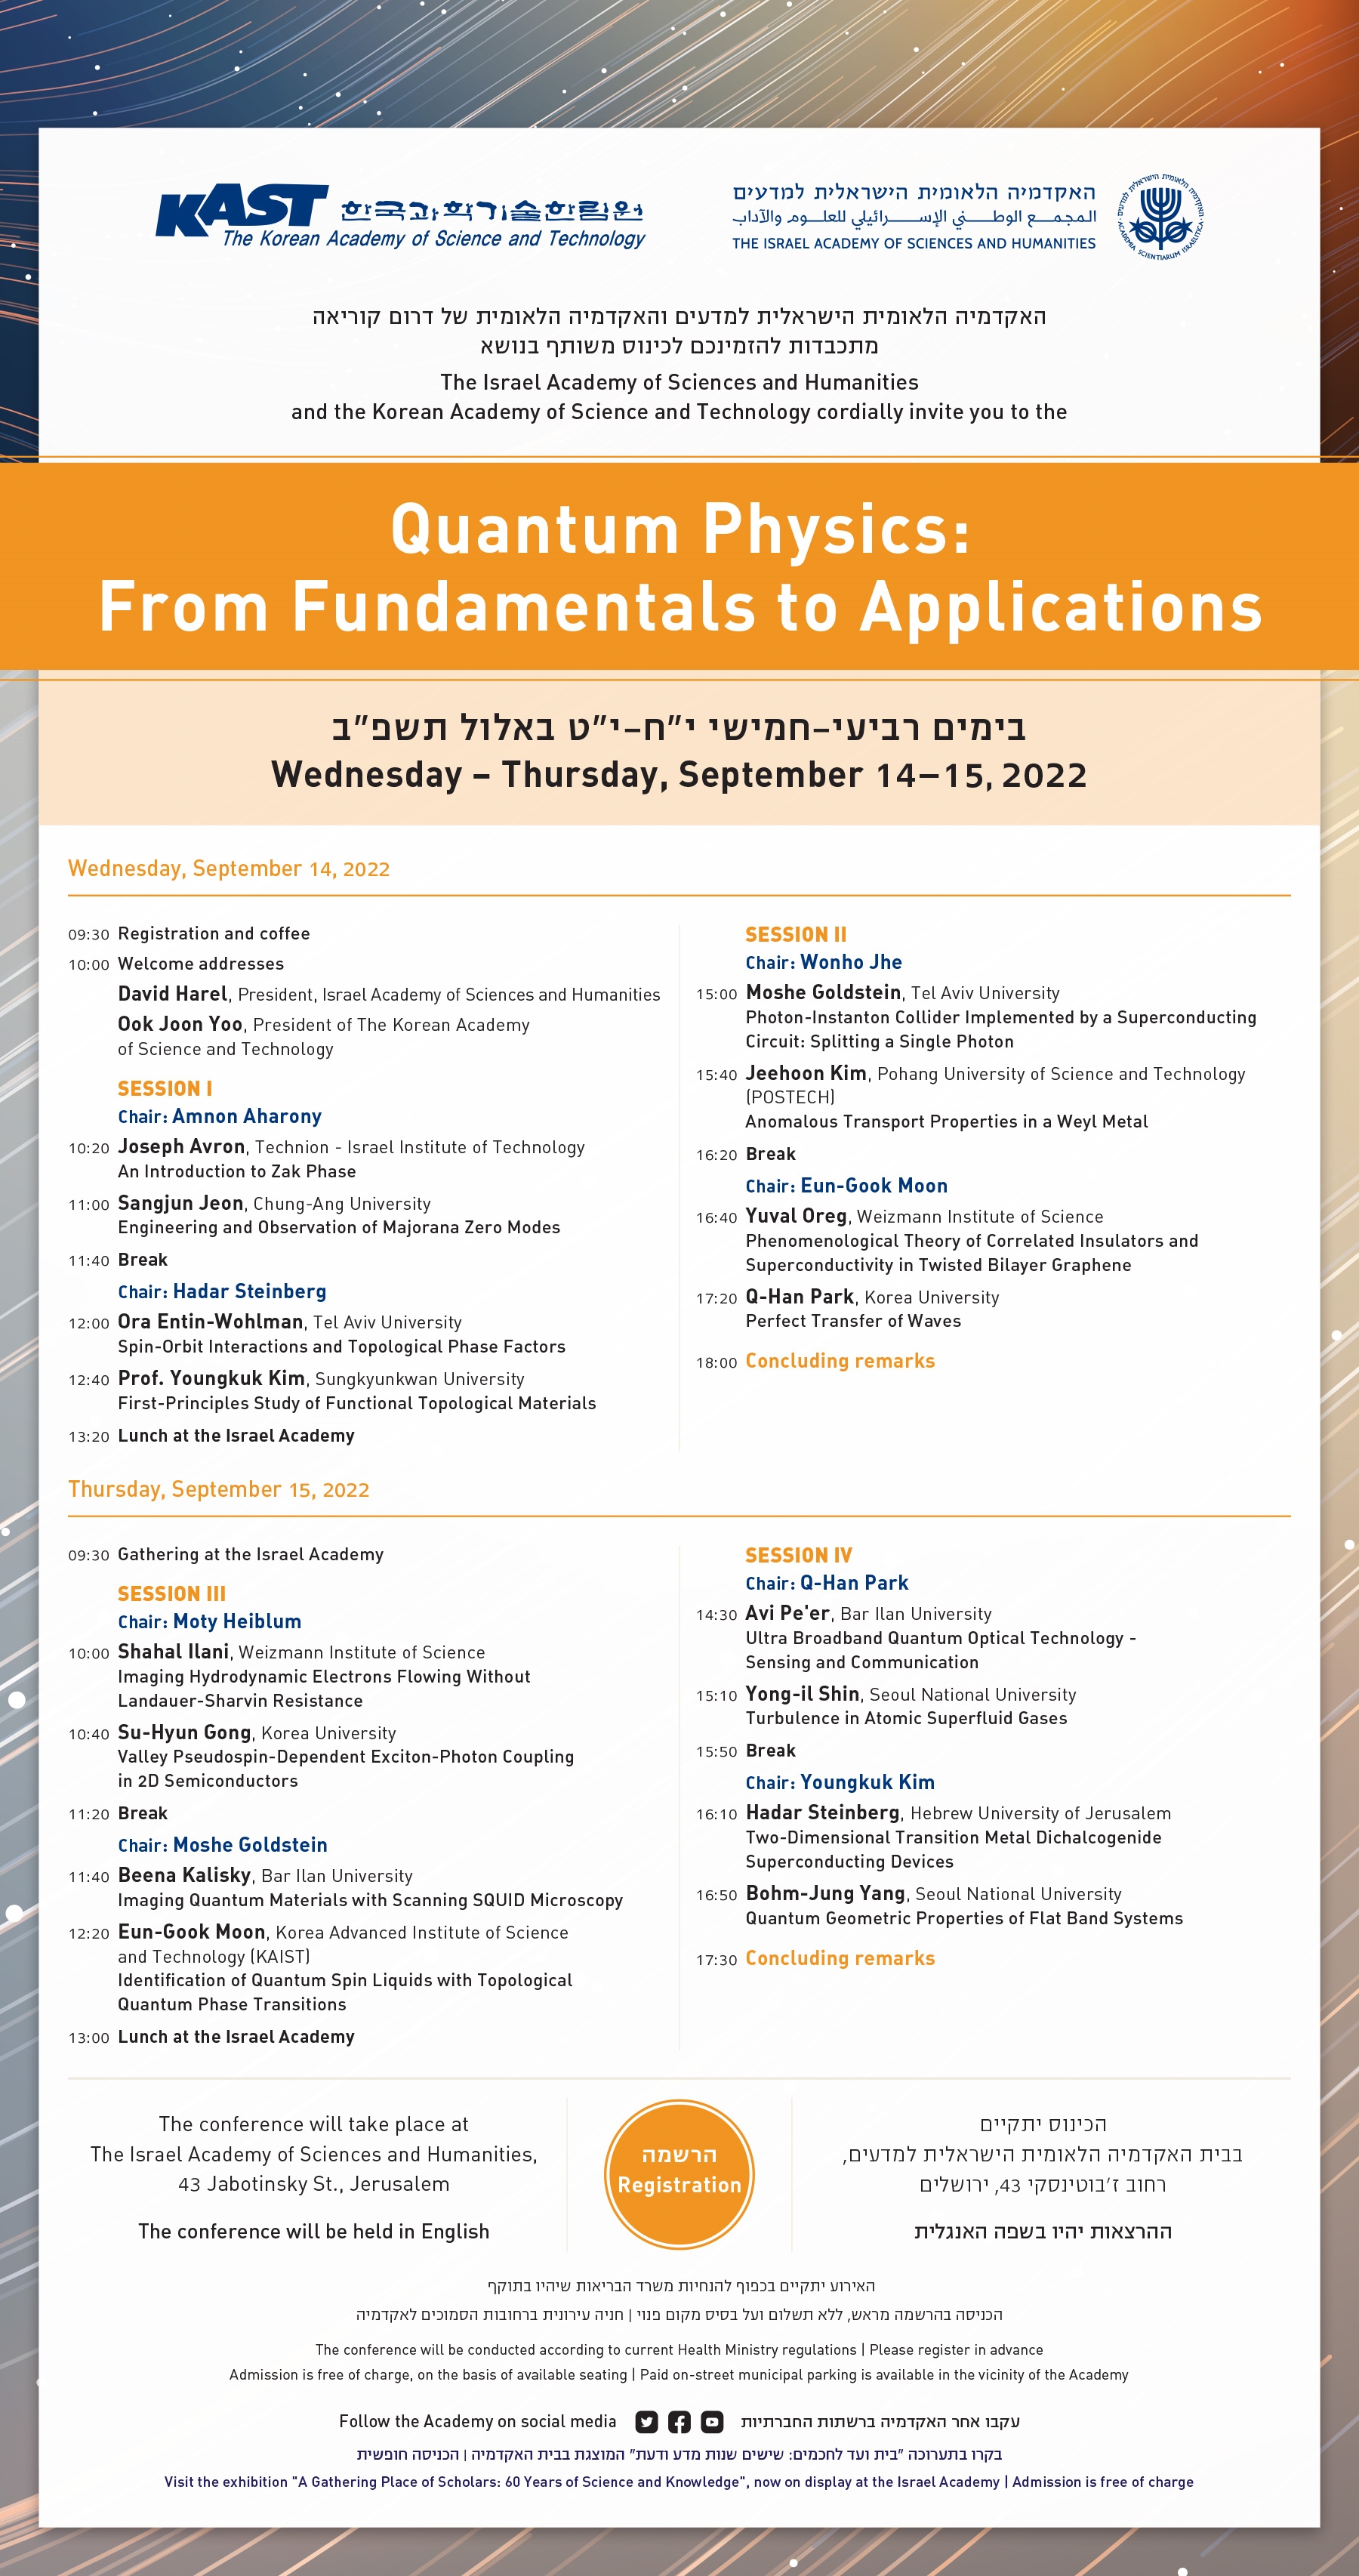 Joint conference with the Korean Academy of Science and Technology: Quantum Physics: From Fundamentals to Applications